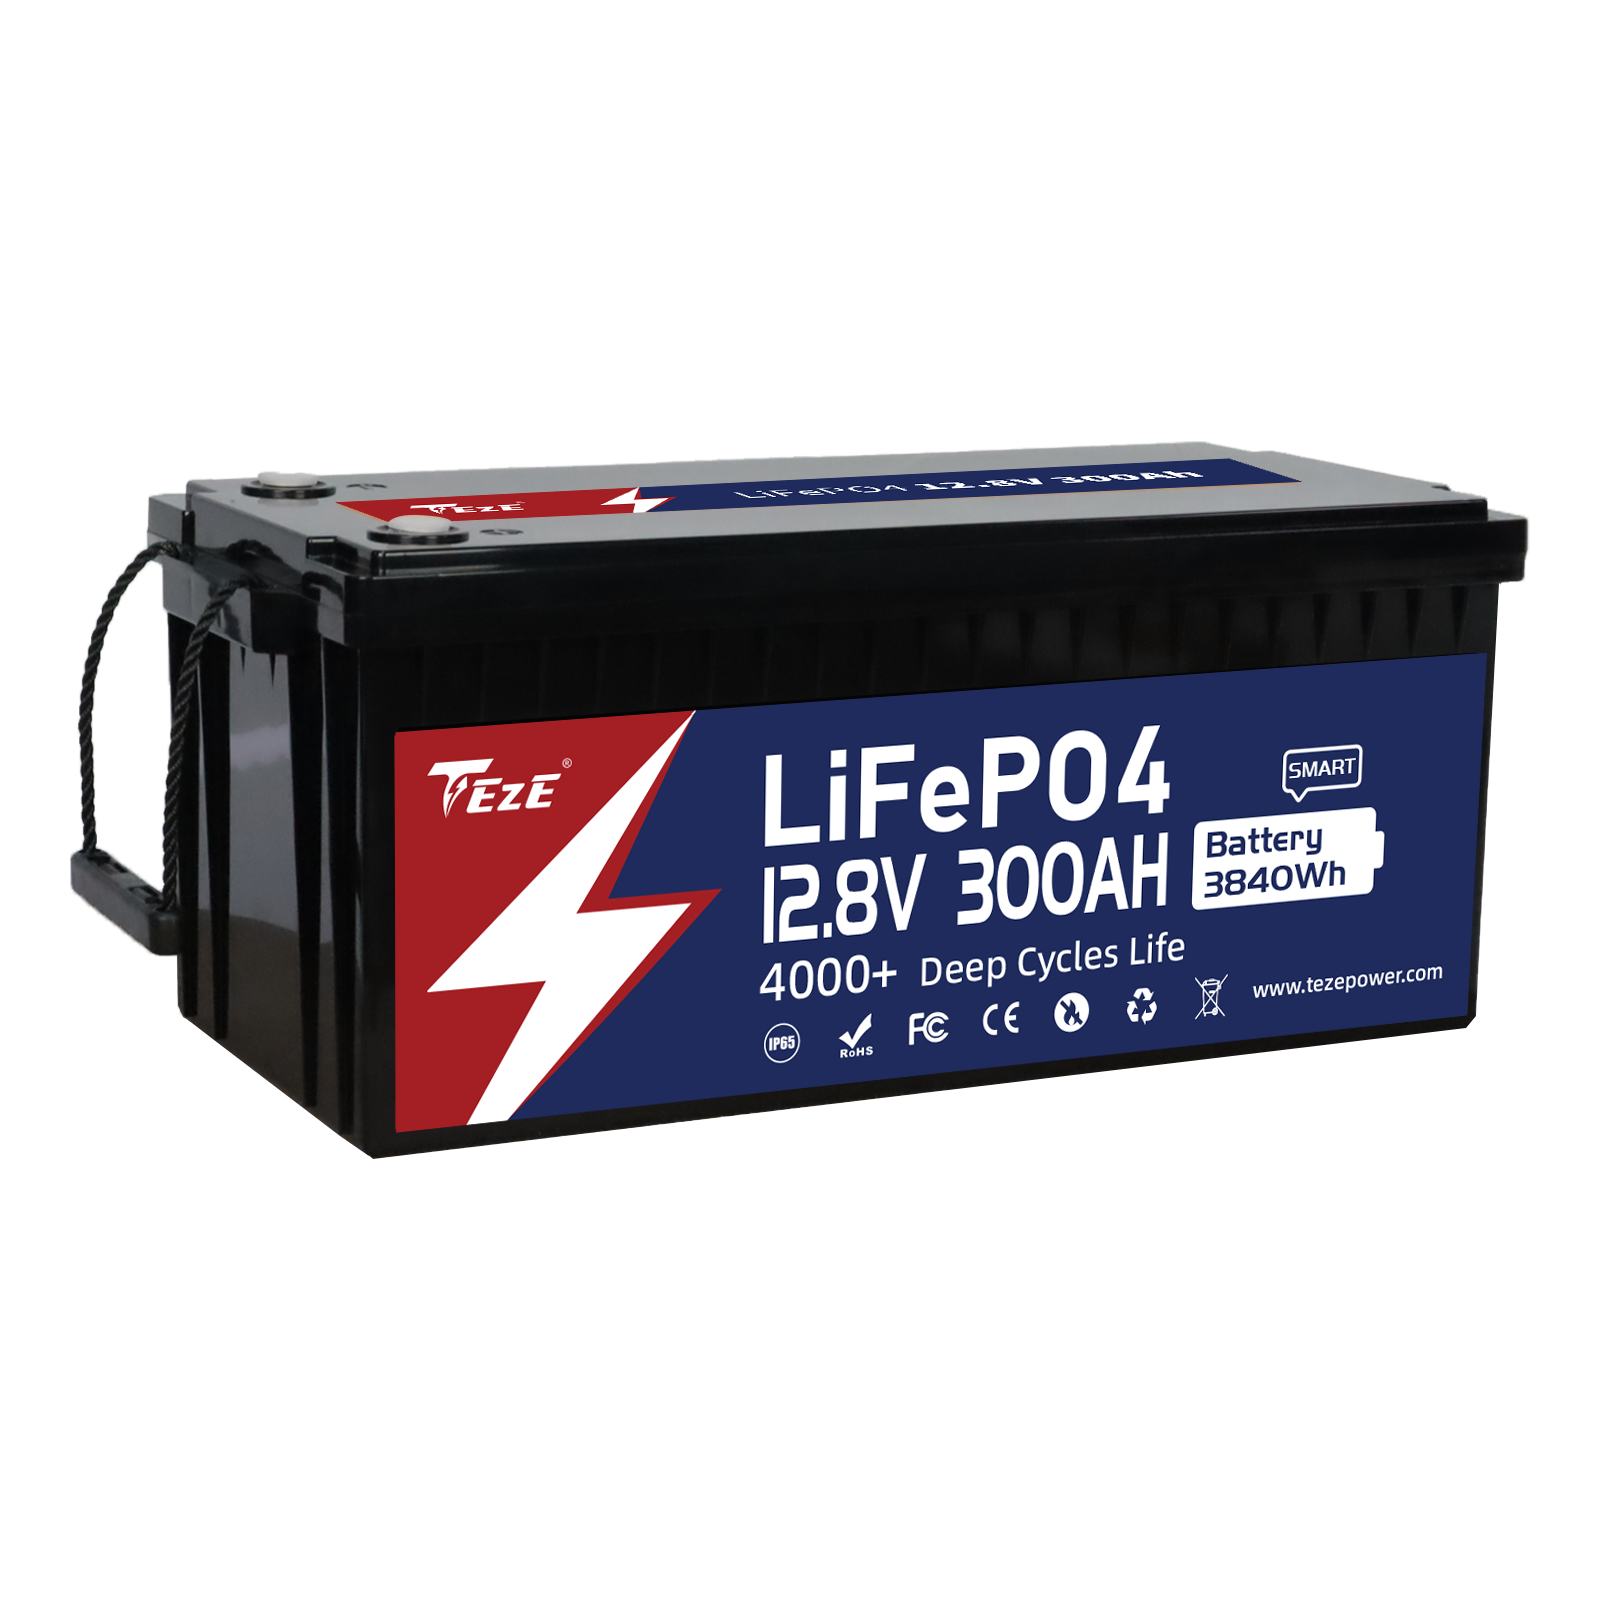 Temgot LiFePO4 Battery 12V 300Ah Lithium Battery - Built-in Bluetooth,  5000+ Cycles, Perfect for Replacing Most of Backup Power, Home Energy  Storage